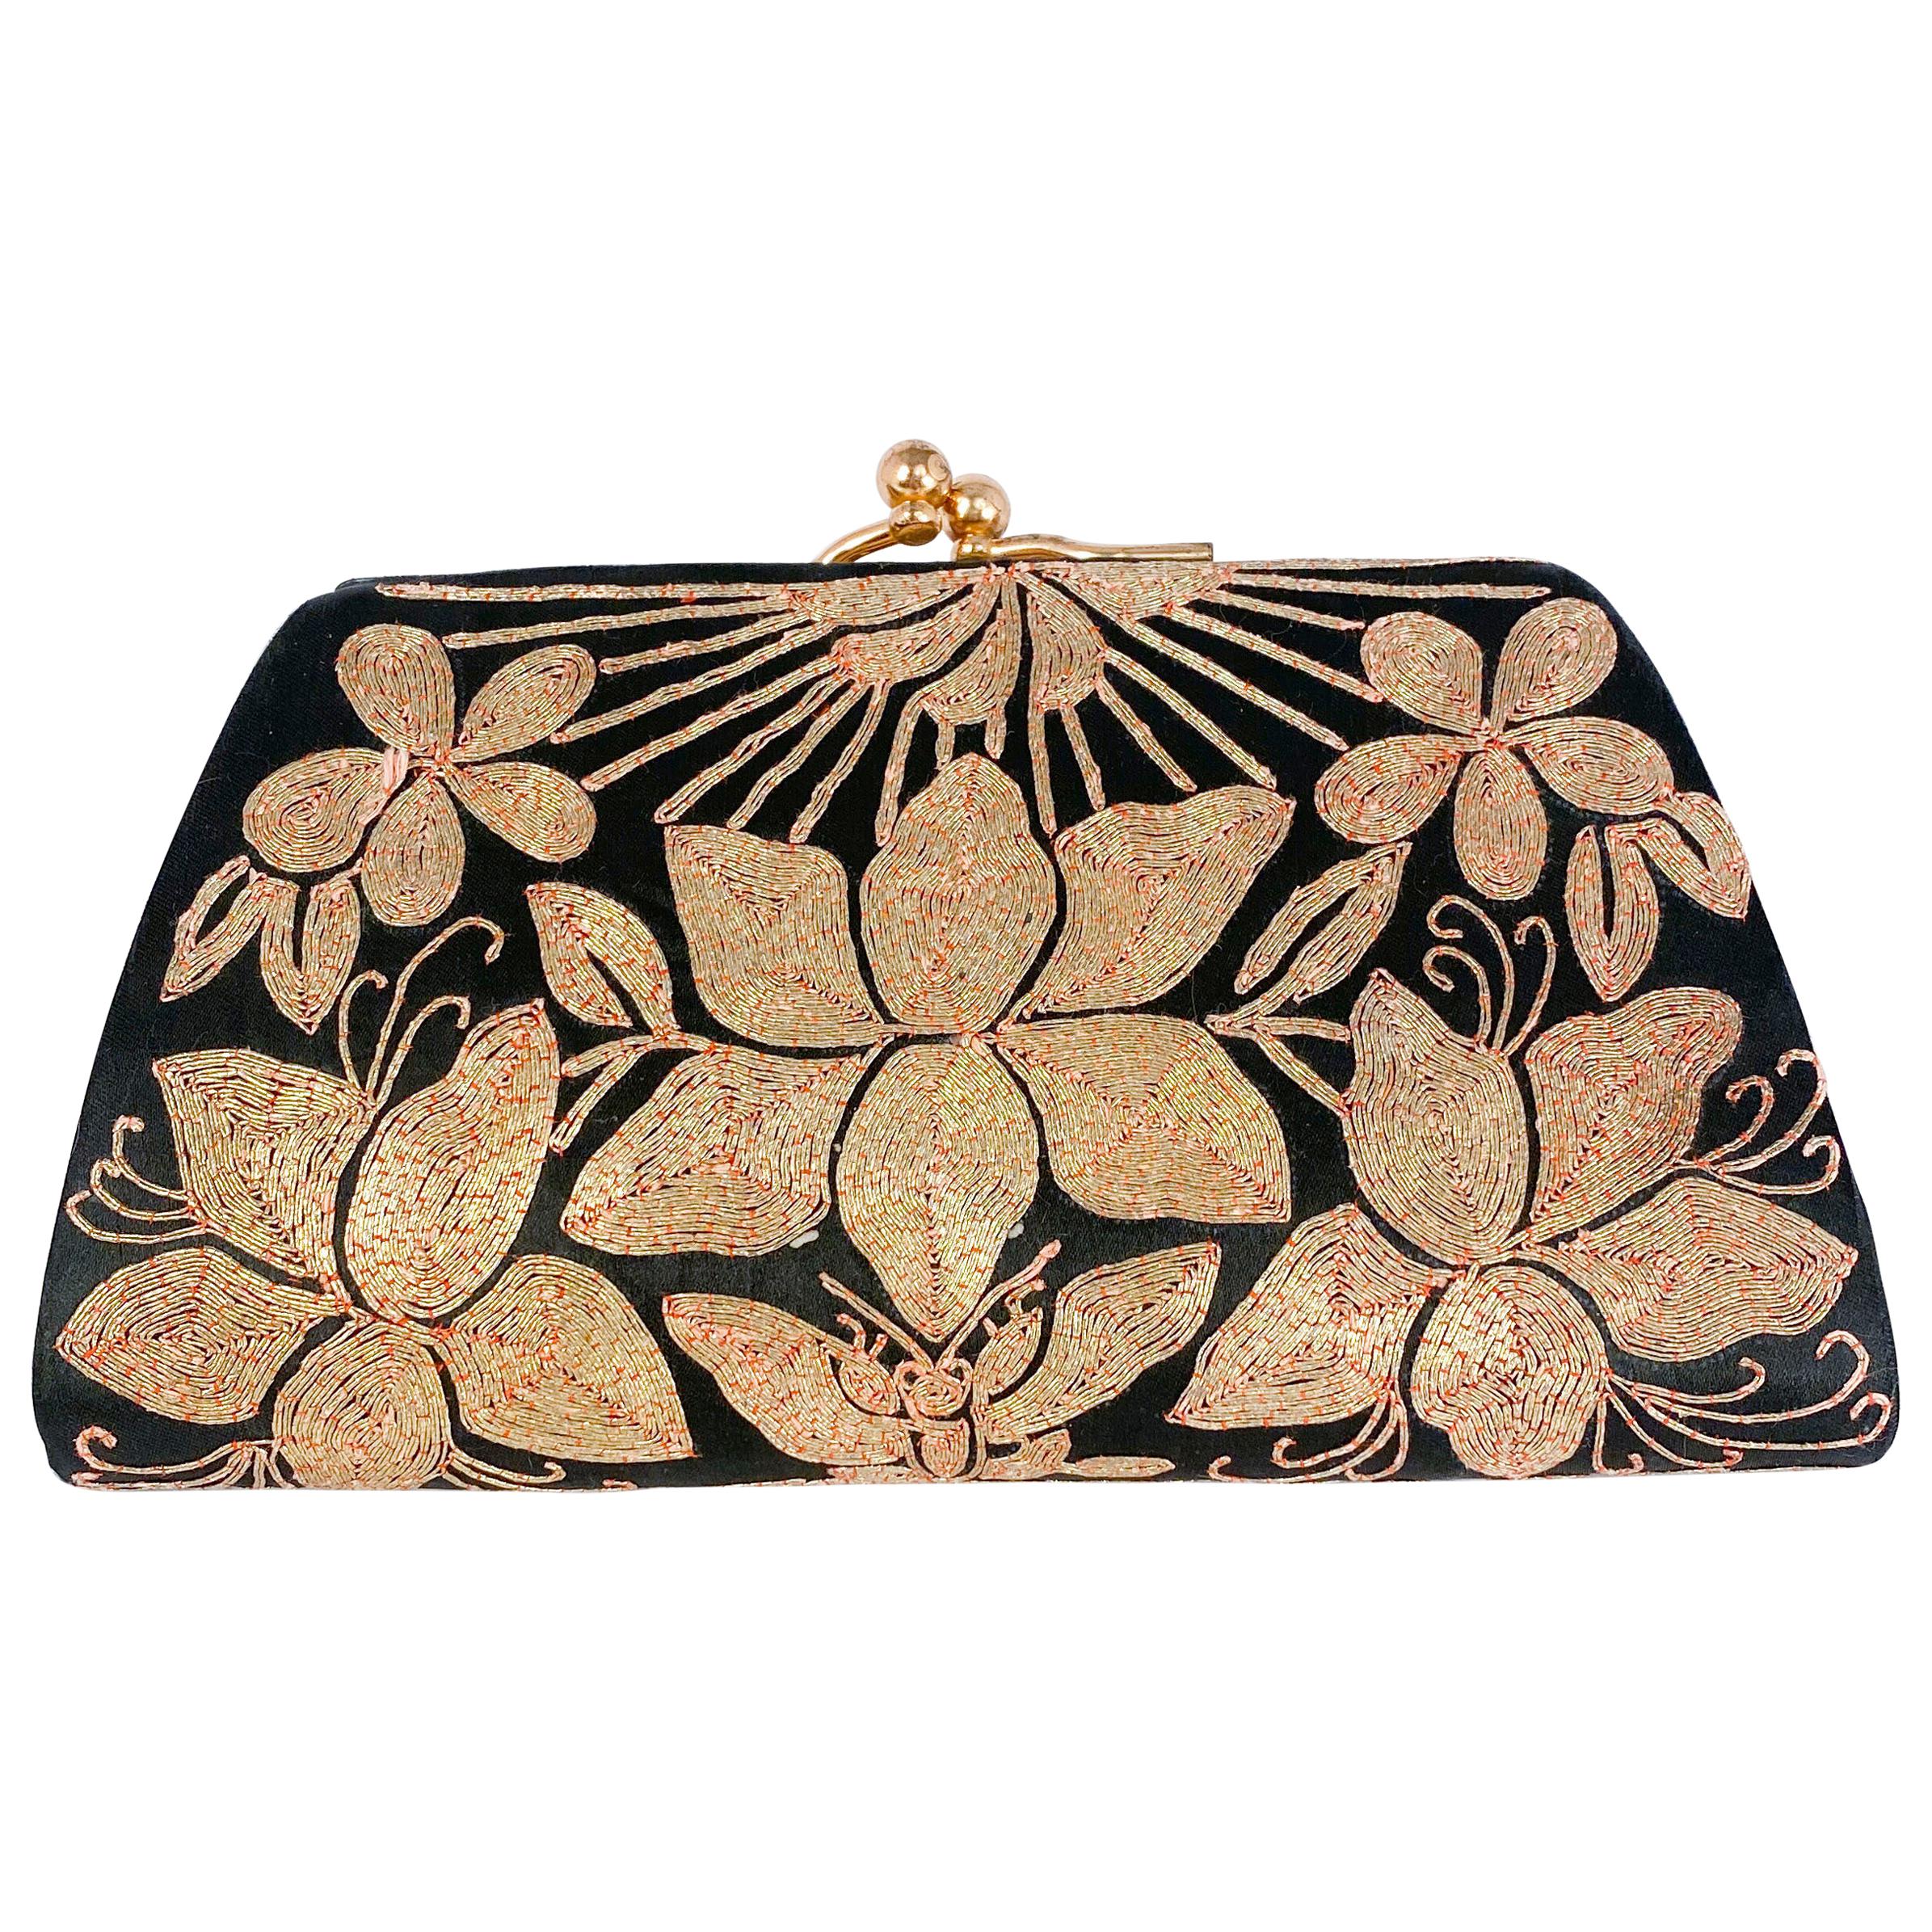 1940s Black Satin Evening Clutch with Gold Metallic Shusu Embroidery 